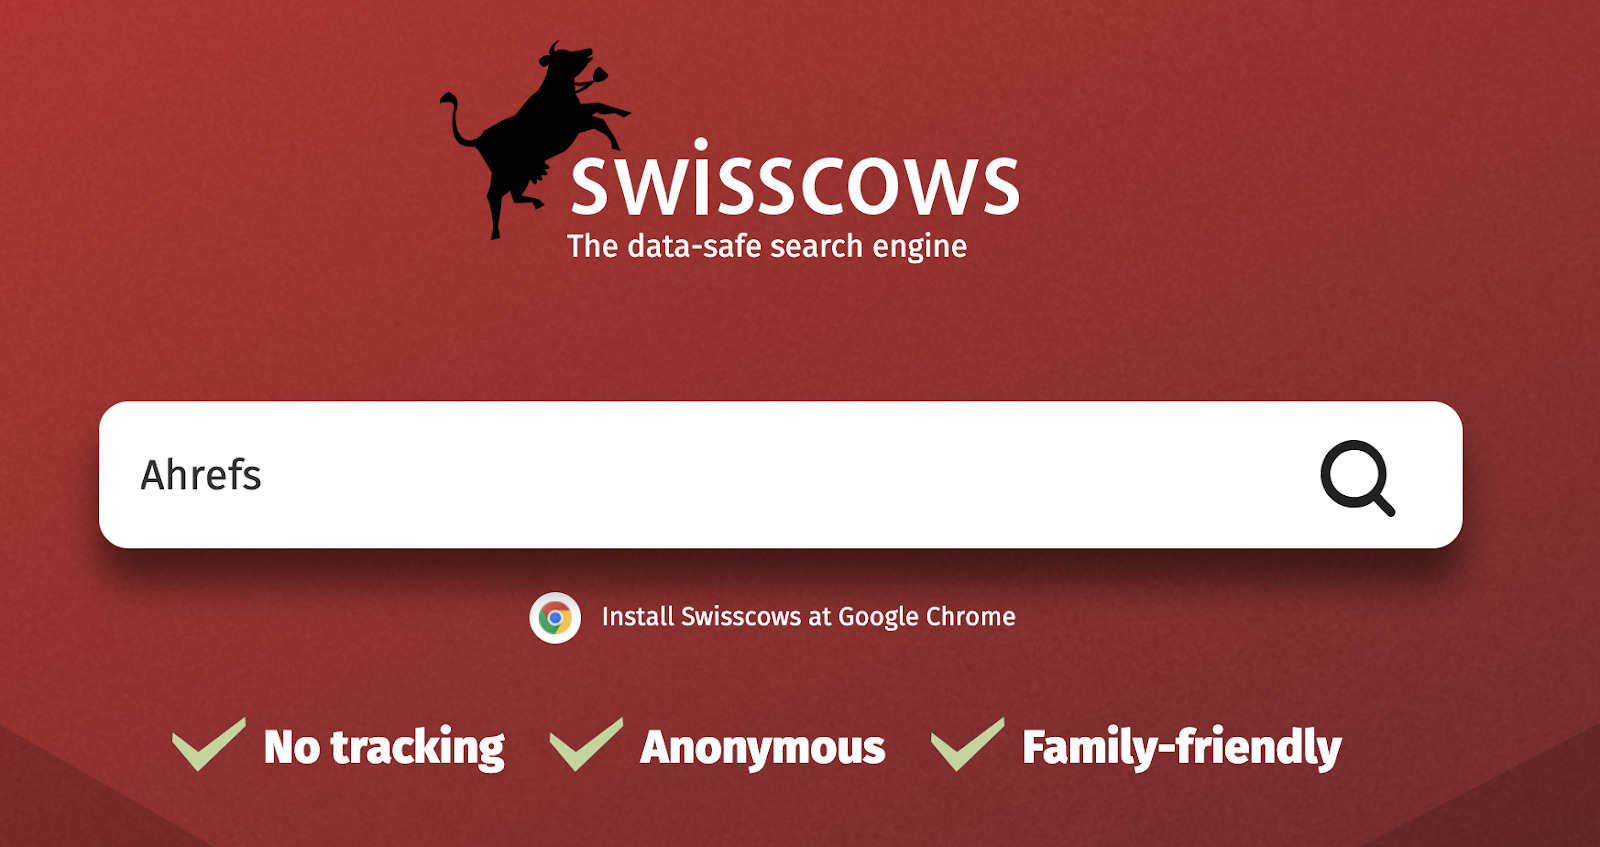 Swisscows' homepage. Search term 